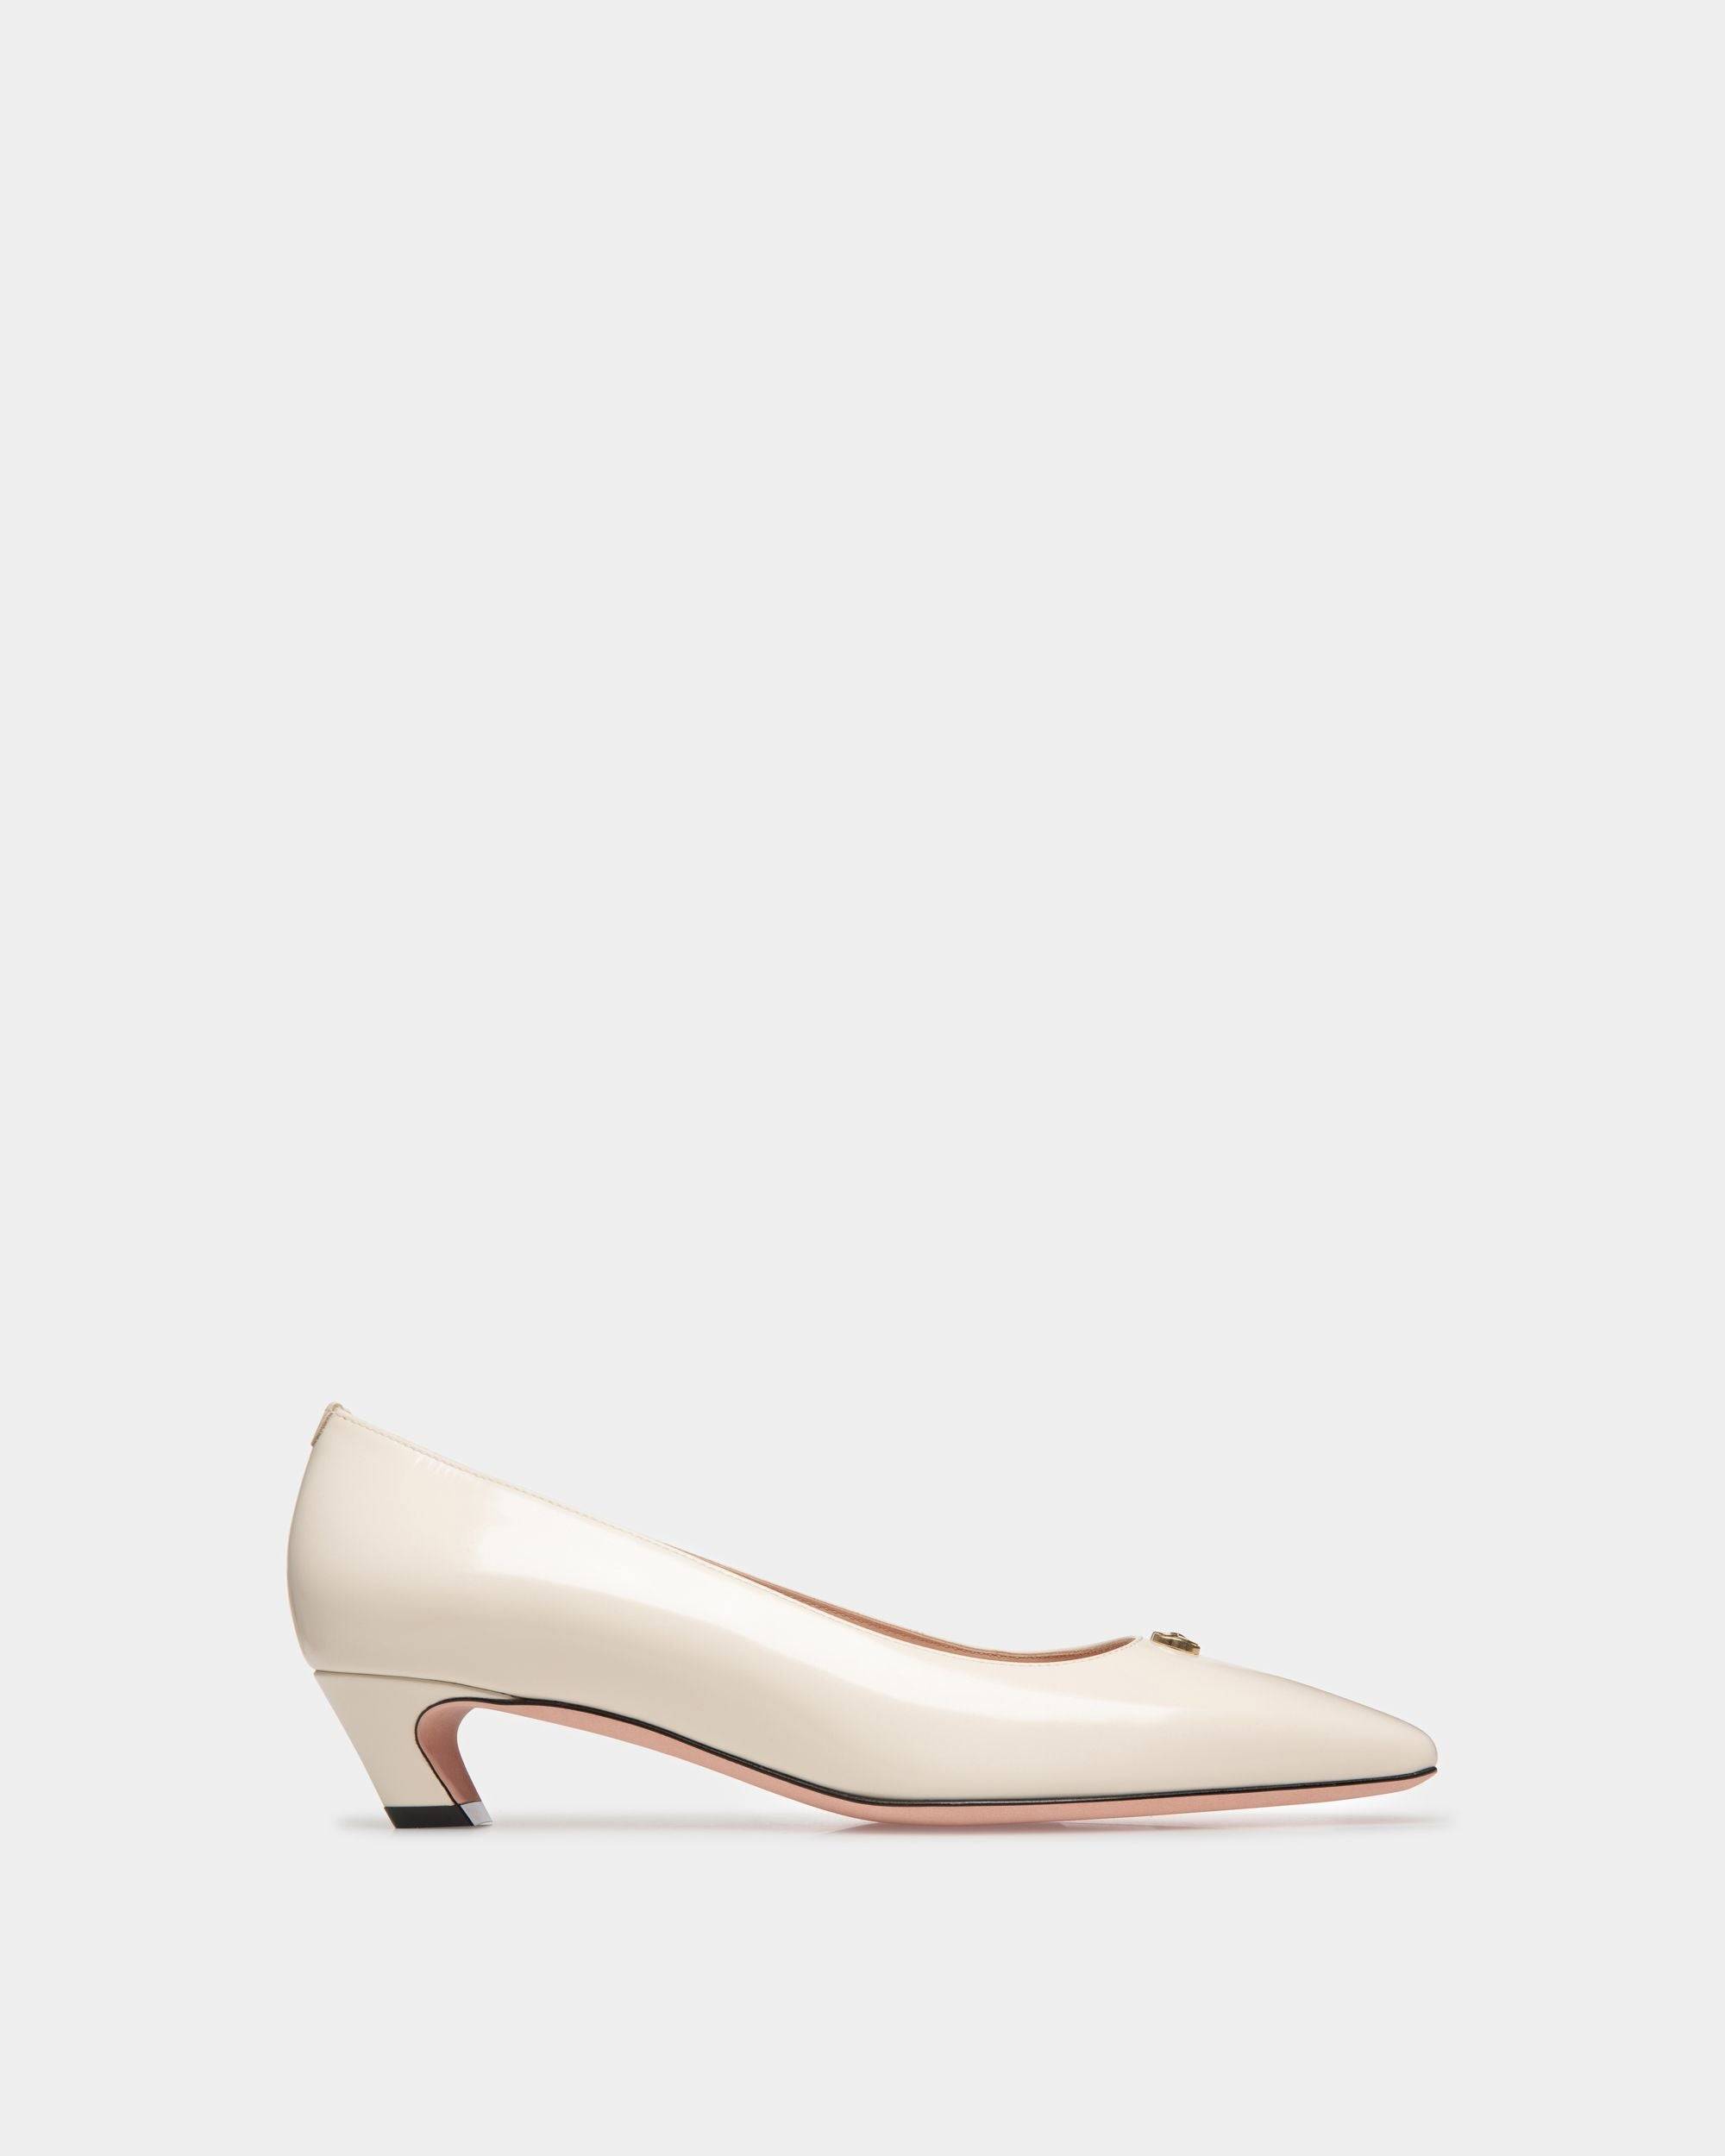 Sylt | Women's Pump in White Leather | Bally | Still Life Side